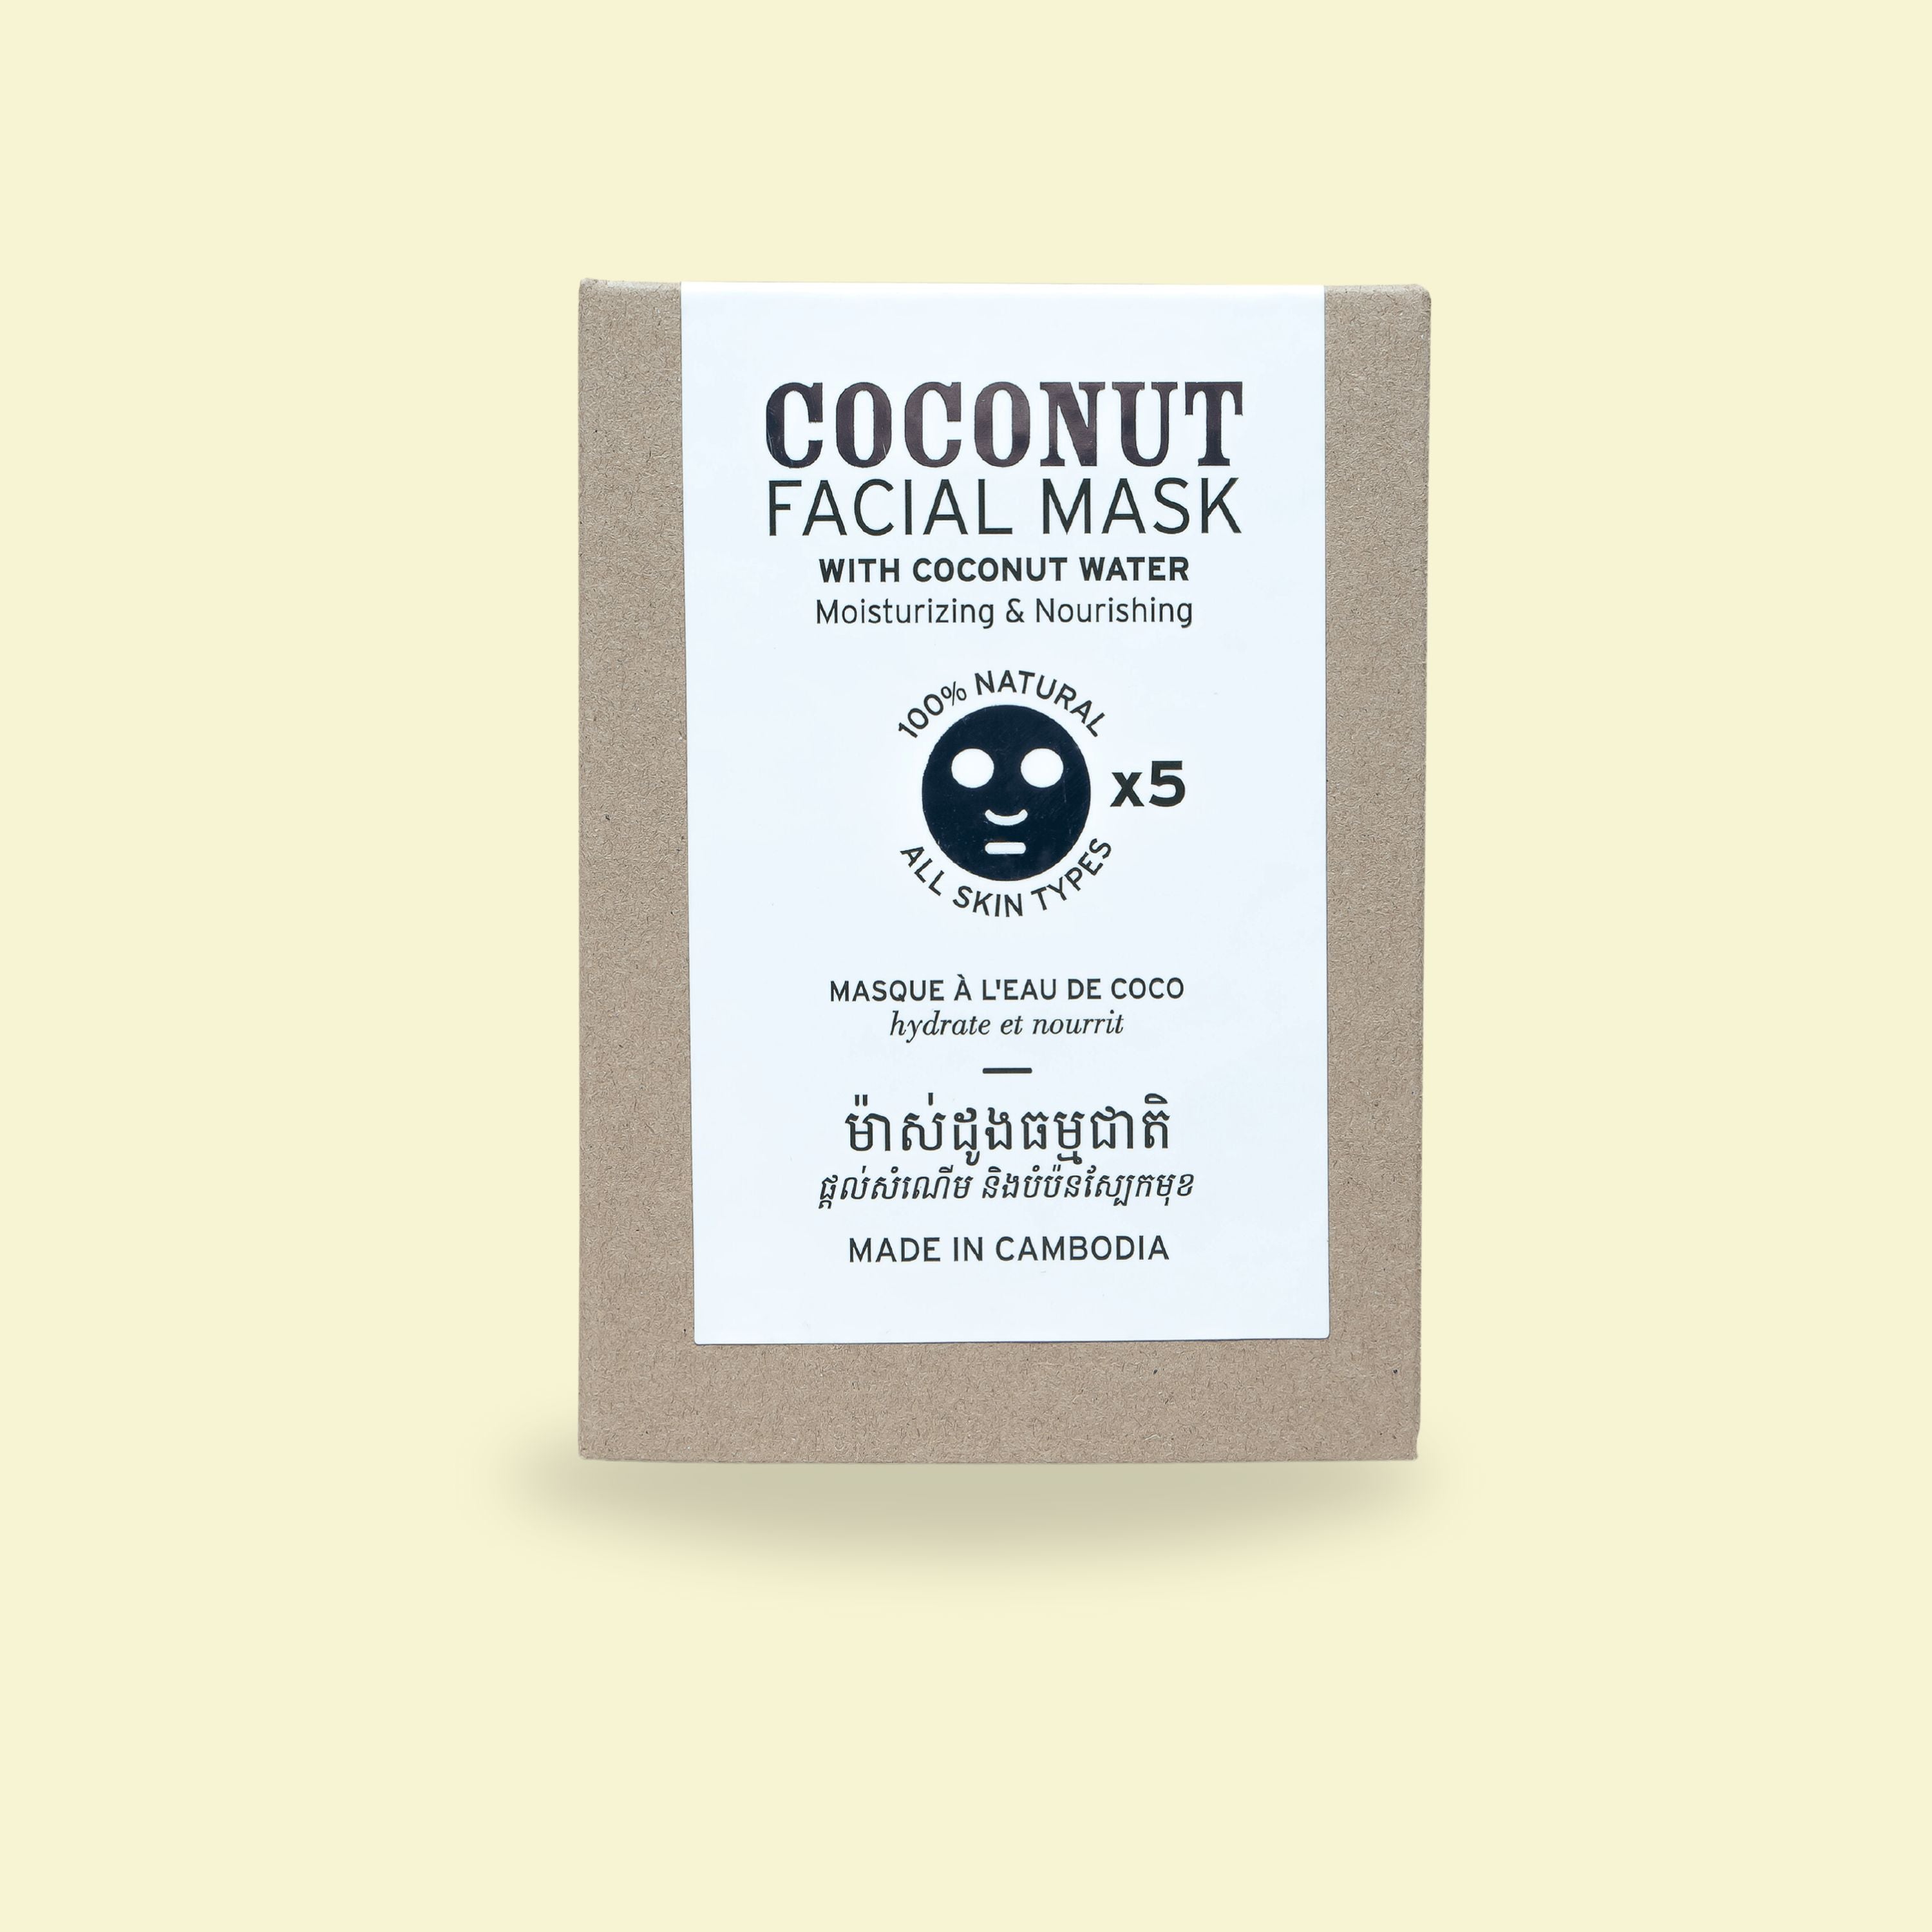 Coconut facial mask by bodia 